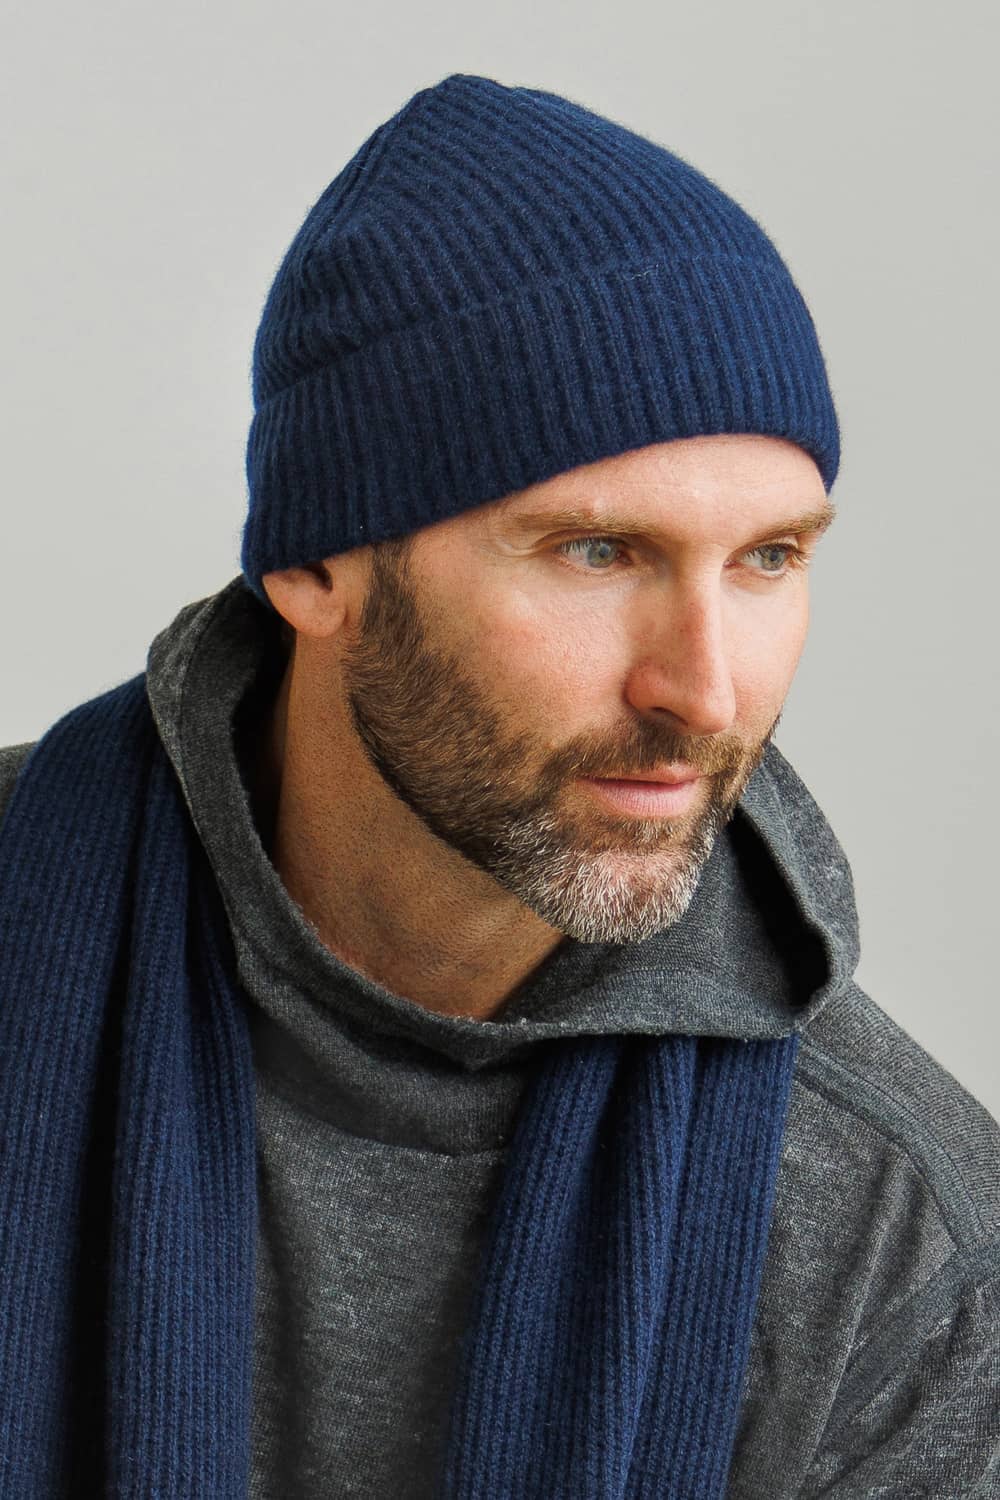 Men's Pure Cashmere Beanies & Hats, Ribbed Design